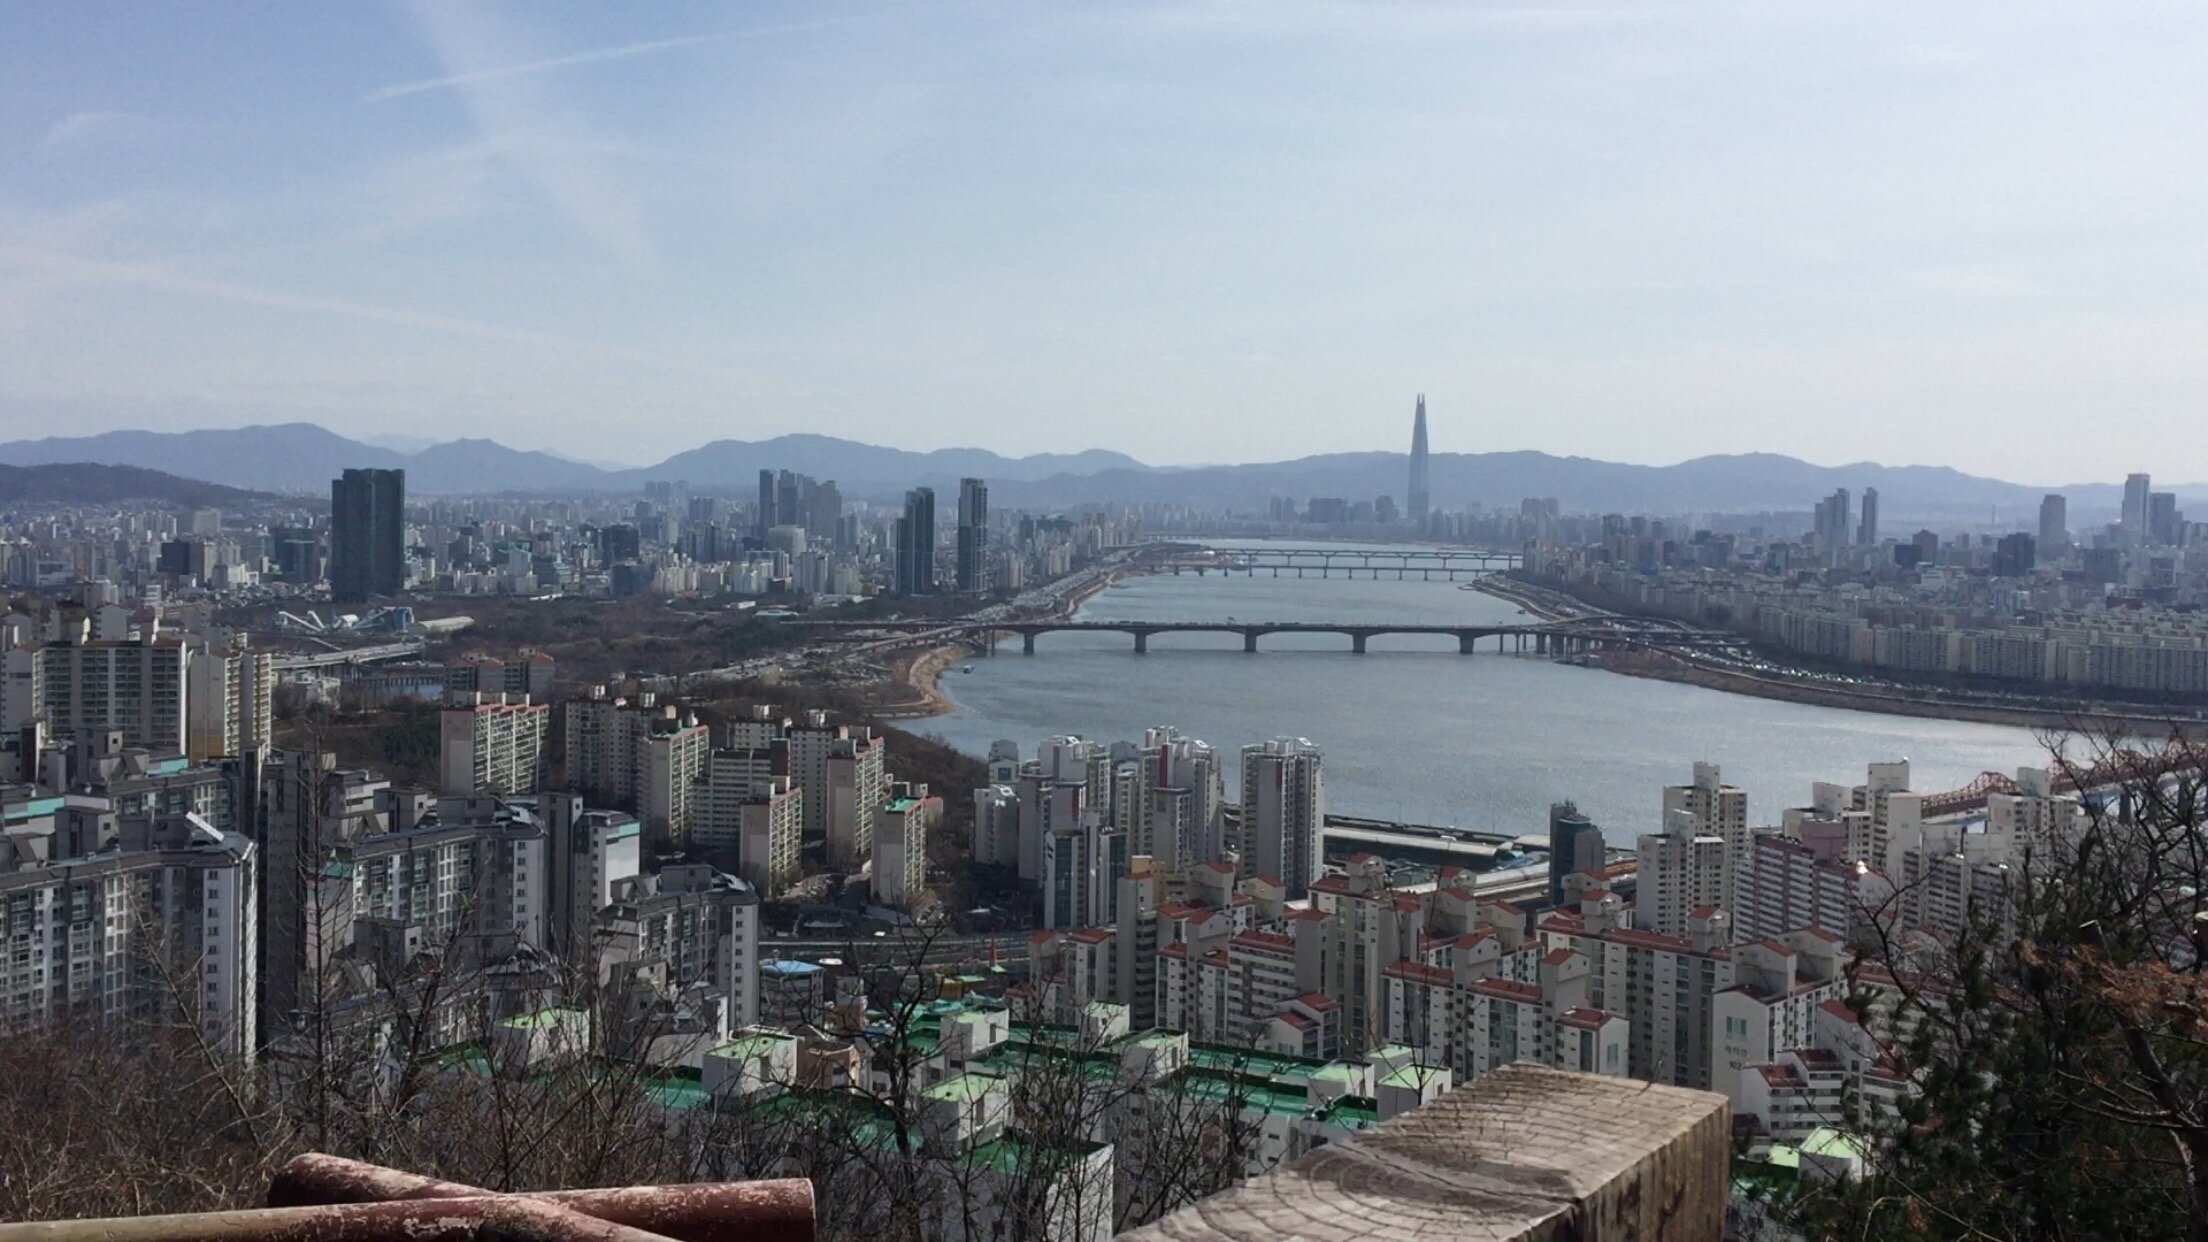 A View of Seoul from a cultural exchange trip in Spring 2018.